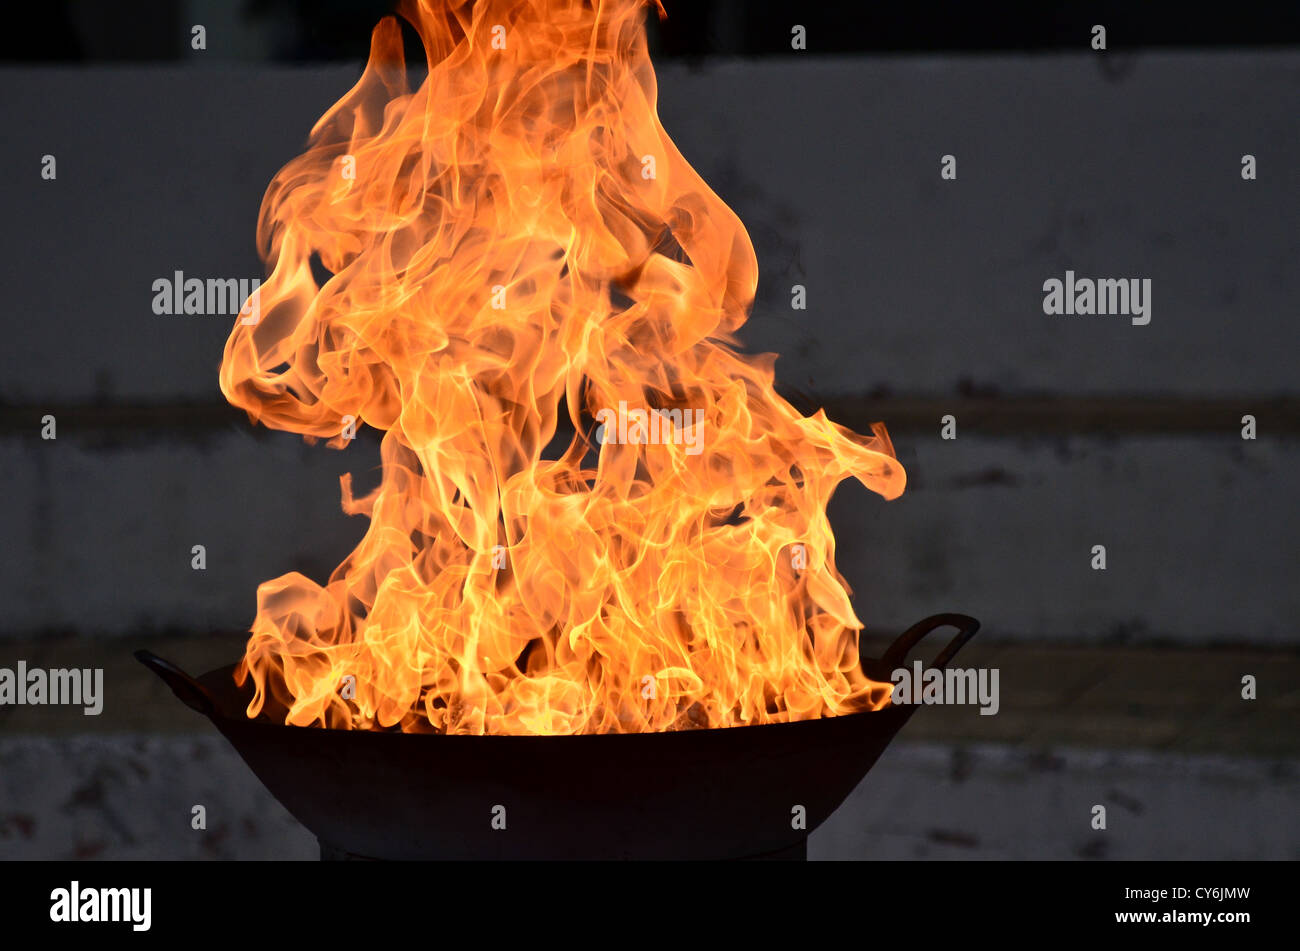 fire burning fiercely and hot Stock Photo